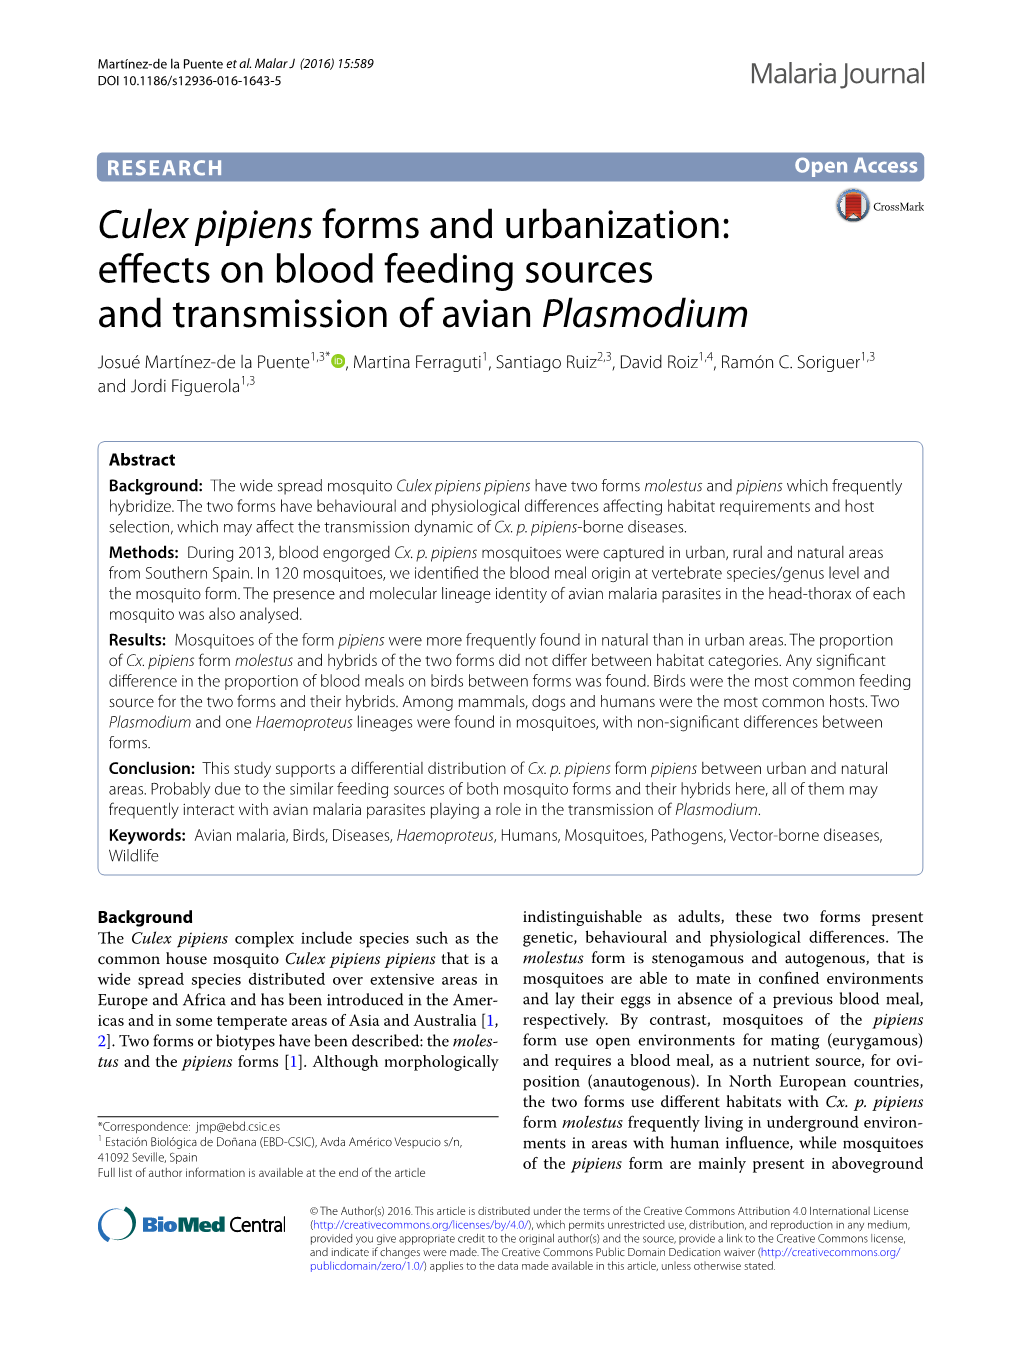 Culex Pipiens Forms and Urbanization: Effects on Blood Feeding Sources